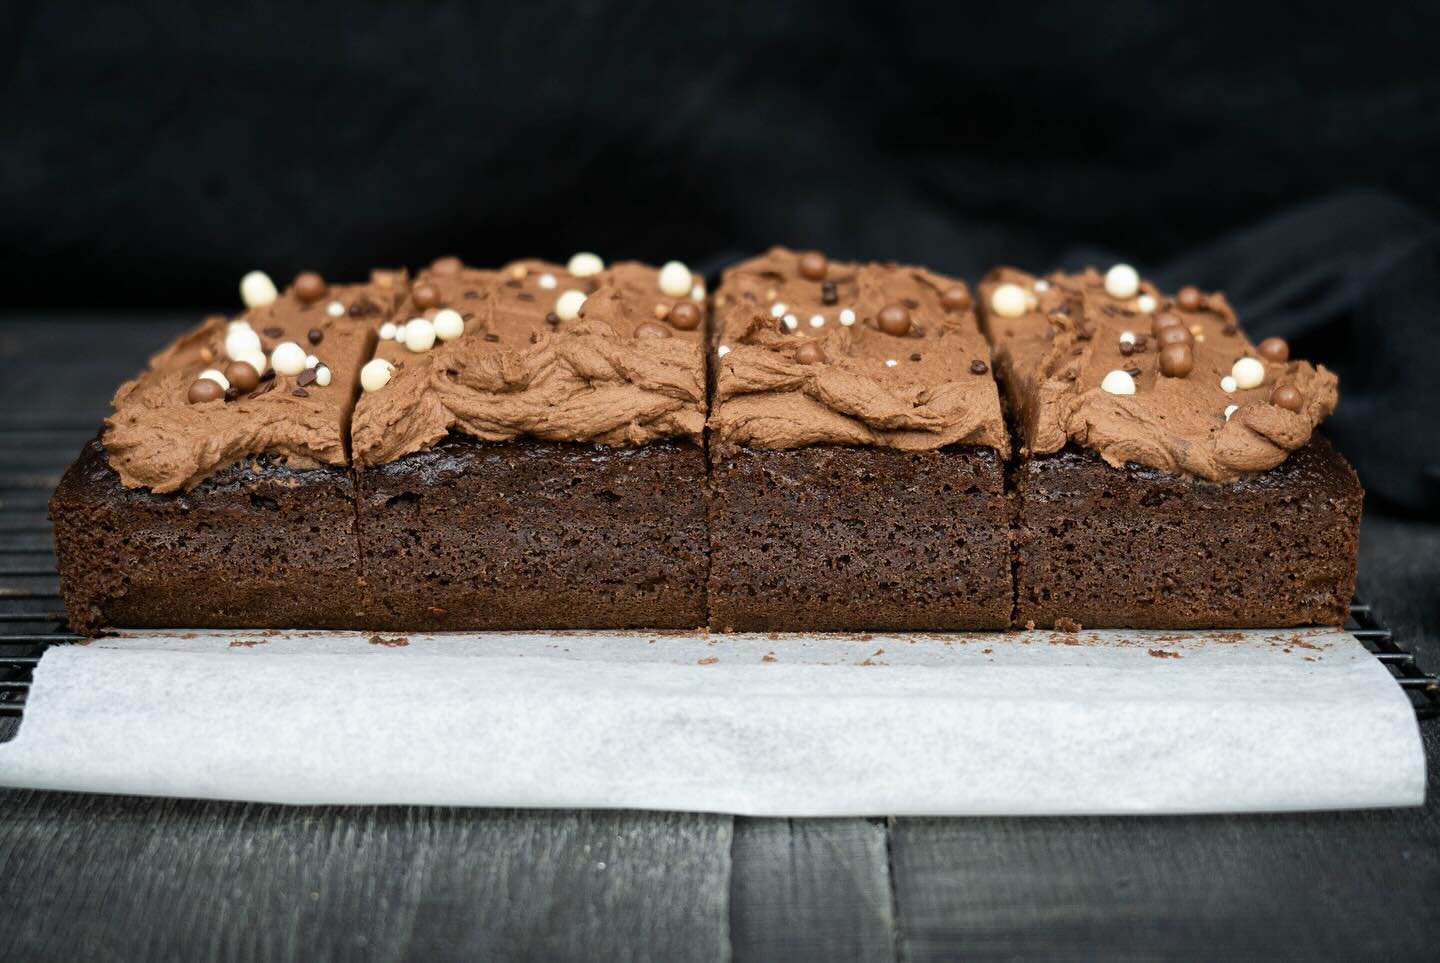 A teeny, tiny little chocolate sheet cake. It bakes in a loaf pan and makes six slices, just enough for a small group, or for two hungry people. Ideal when you need some chocolate cake, but don&rsquo;t want cake leftovers for days. 

This cake used b